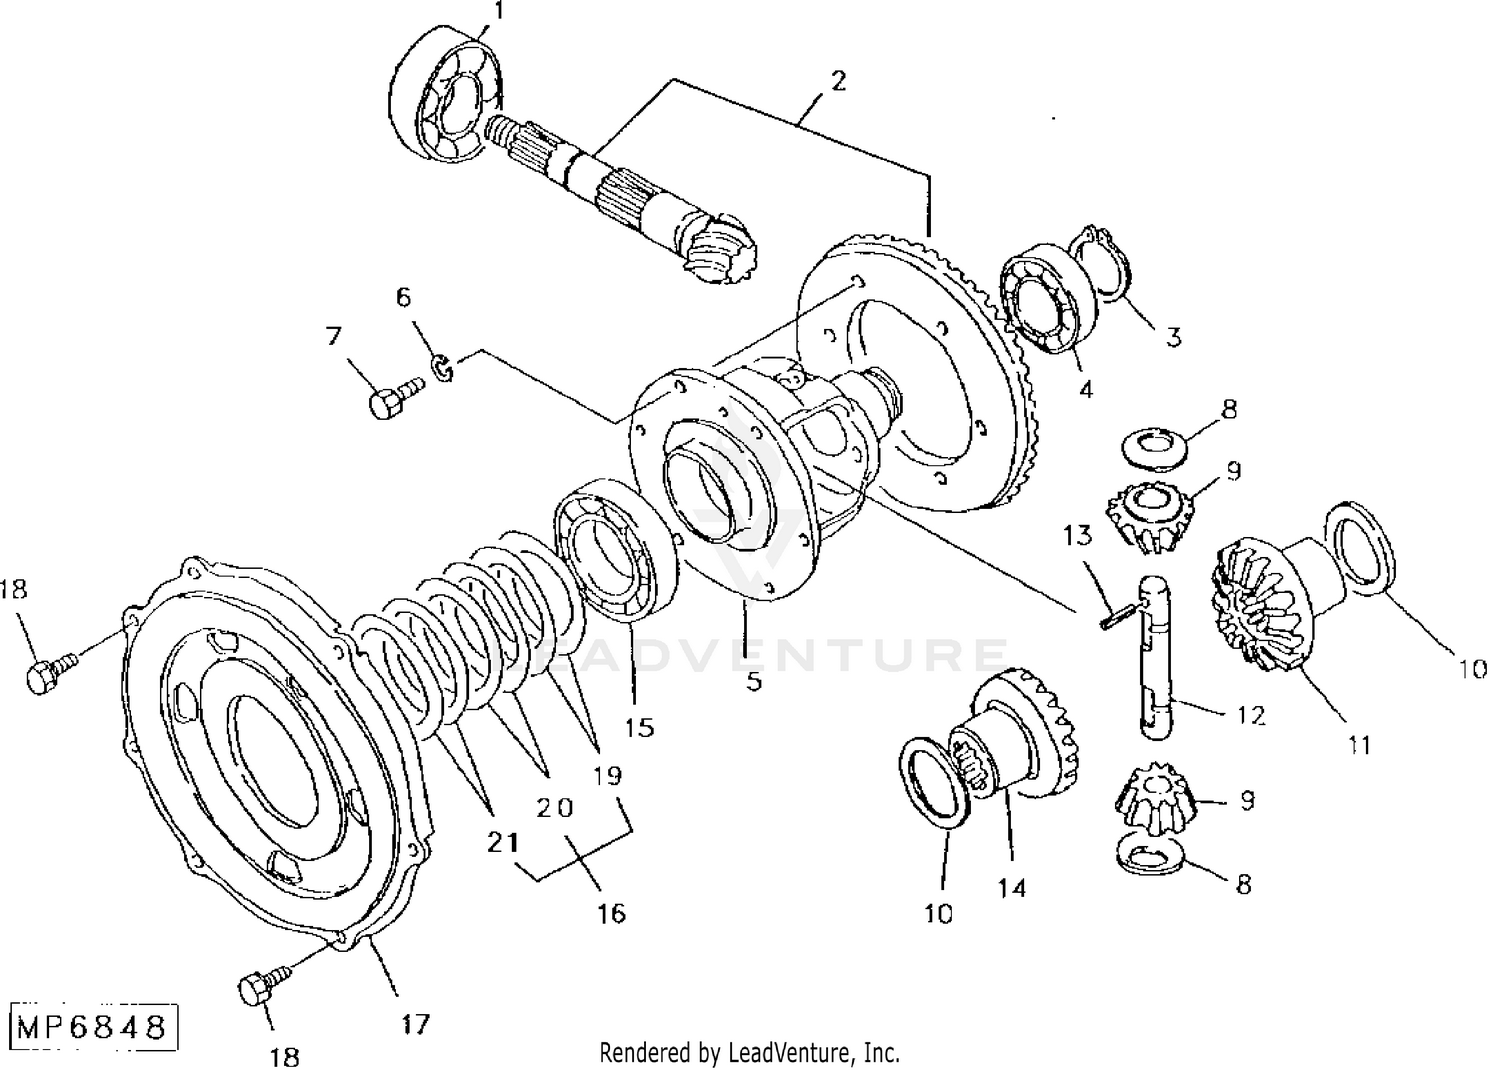 John Deere 1070 Tractor Manual Transmission Clutch Assembly